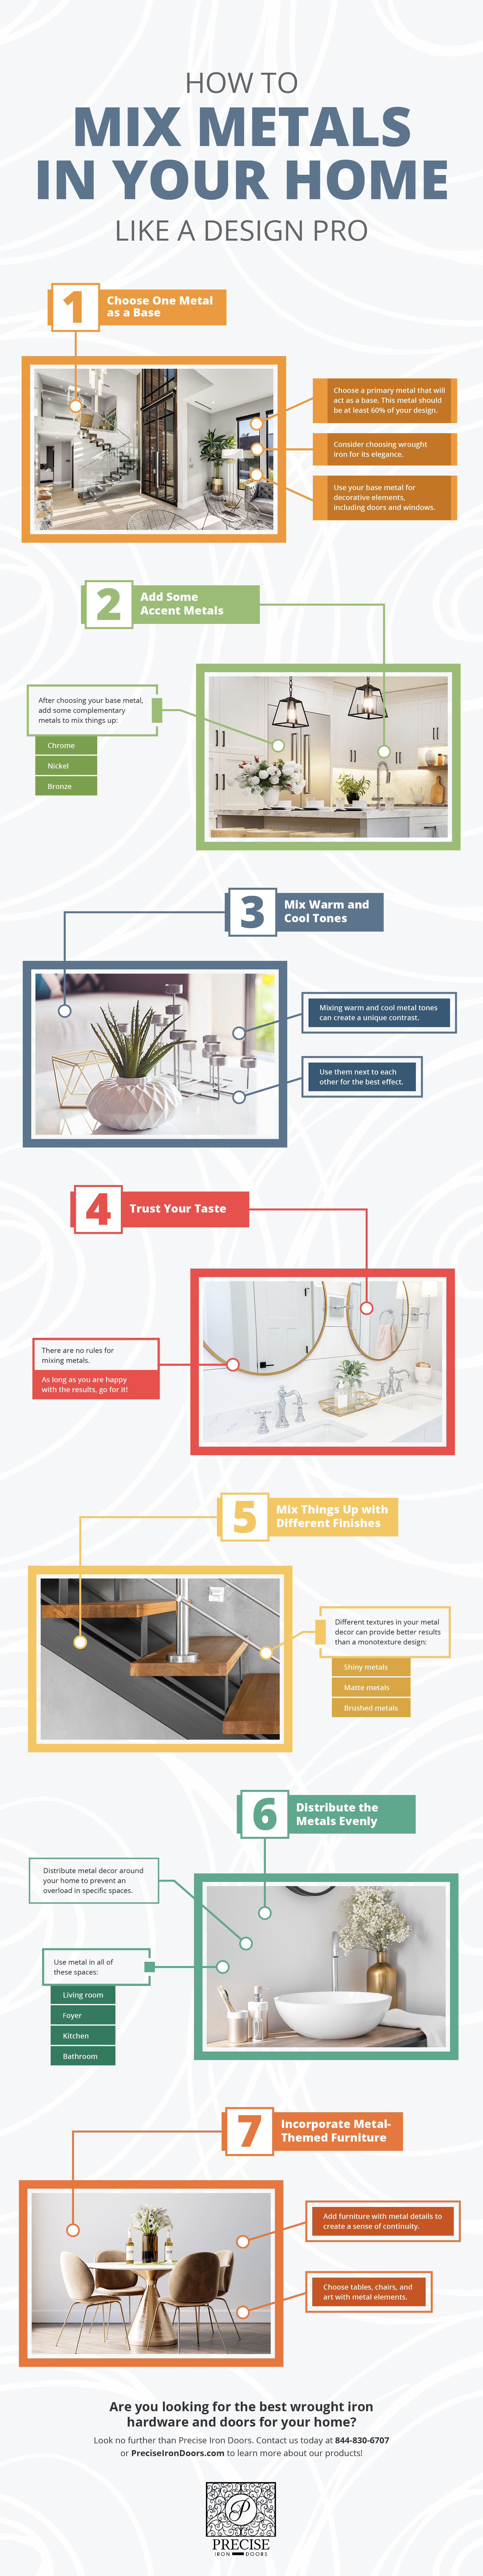 How to Mix Metals in Your Home Like a Design Pro Infographic